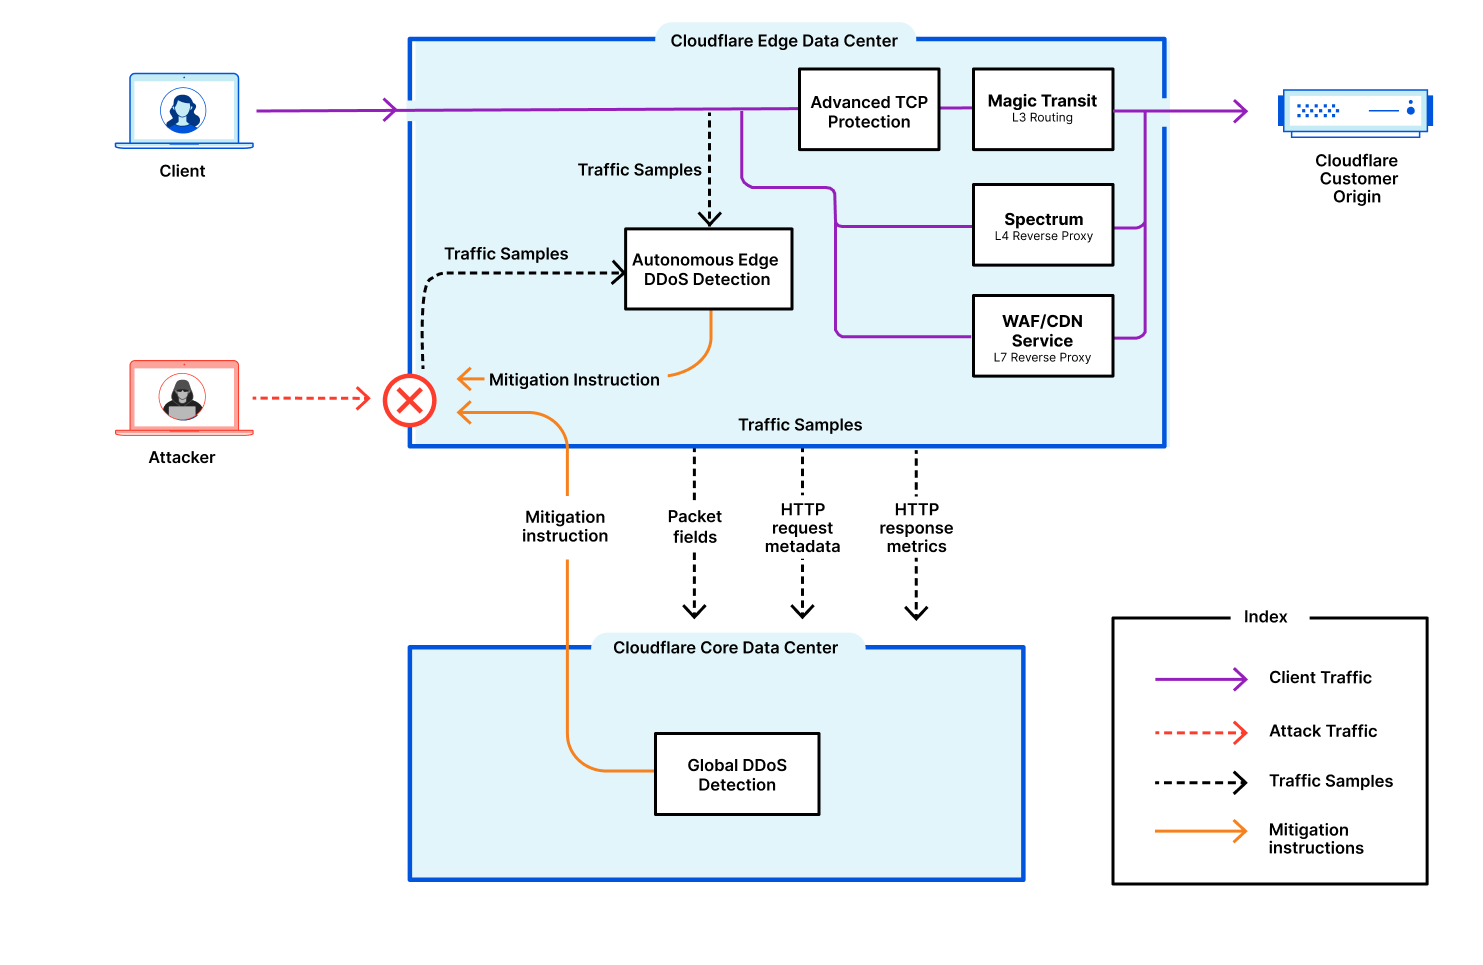 Diagram with the main components providing protection against DDoS attacks at Cloudflare